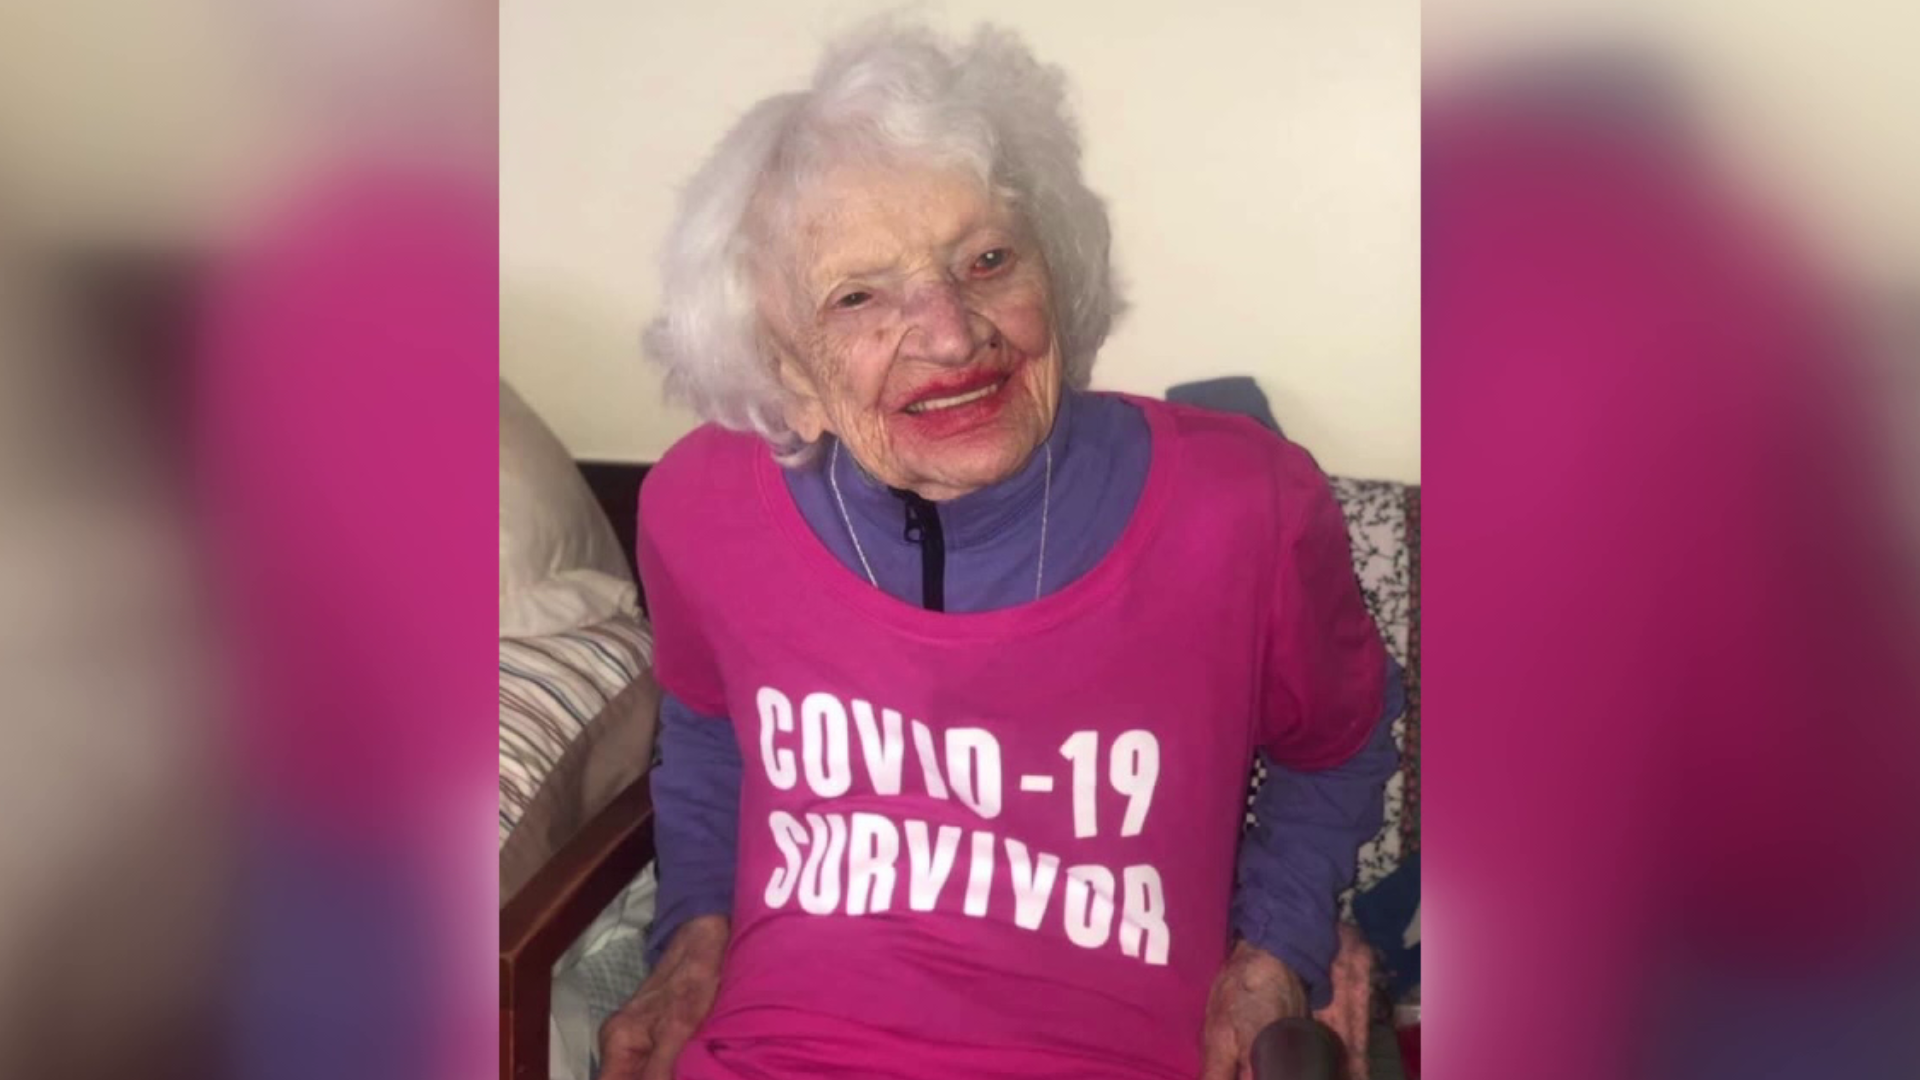 The 99-year-old from Lackawanna County tested positive in May, quarantined for 14 days, and is now back home.